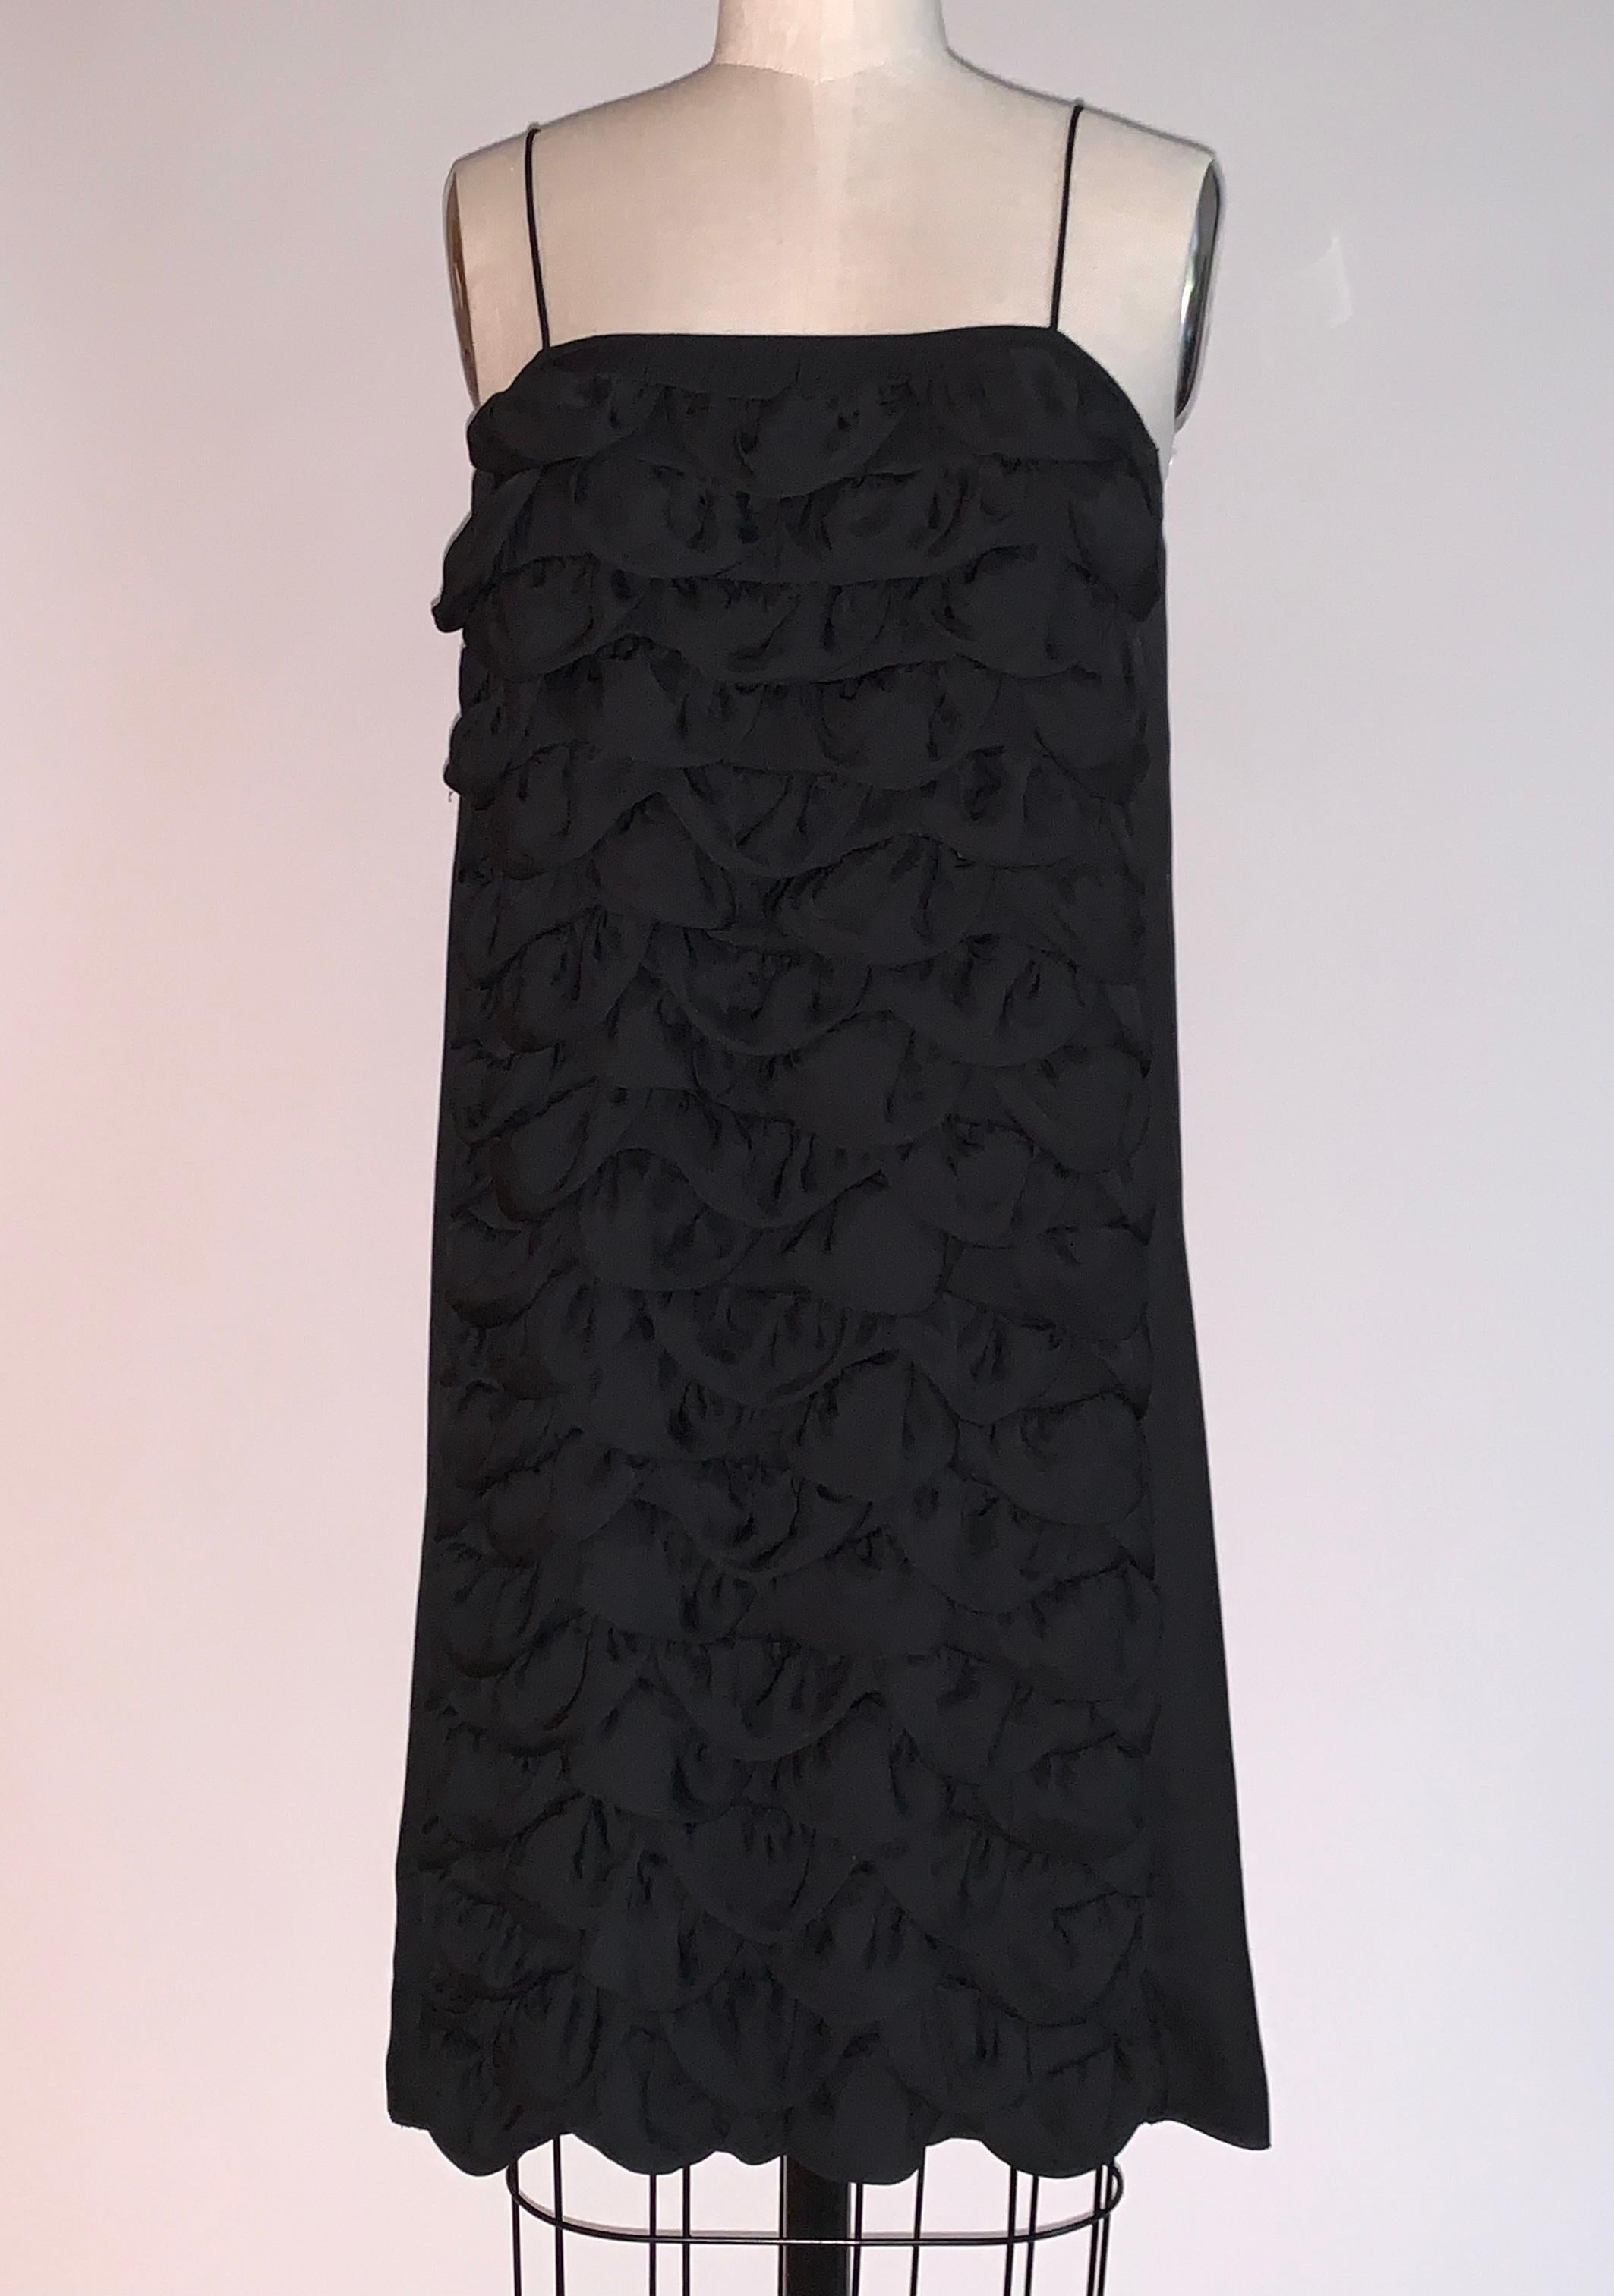 Chanel black sleeveless dress with tiers of petal shaped fabric at front. From the Cruise 2009 collection. Metal CC logo at back top. Lightweight fabric, great as a beach or pool coverup or worn as a casual dress. No closure, pulls on overhead.